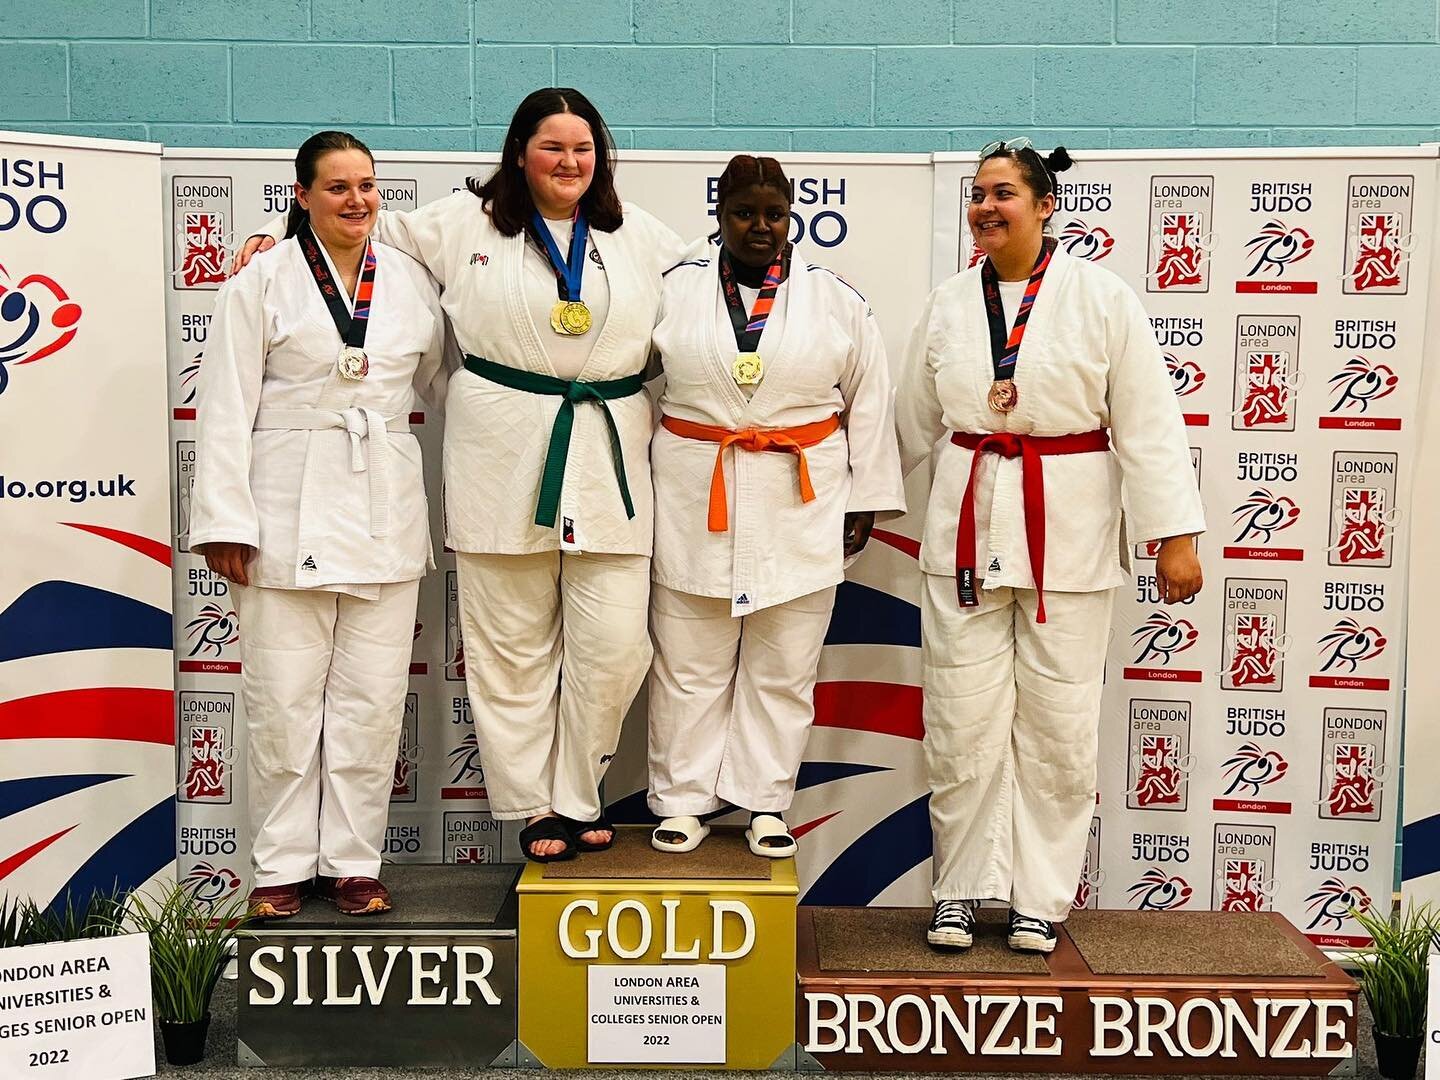 Another fantastic gold for Toia at today&rsquo;s Universities and colleges open at UEL 🎉🎉🎉

🥇🥇🥇🥇🥇🥇🥇🥇

#judo #judowomen #judotraining #champion #martialartists #jud&ocirc; #judothrow #strongwomen